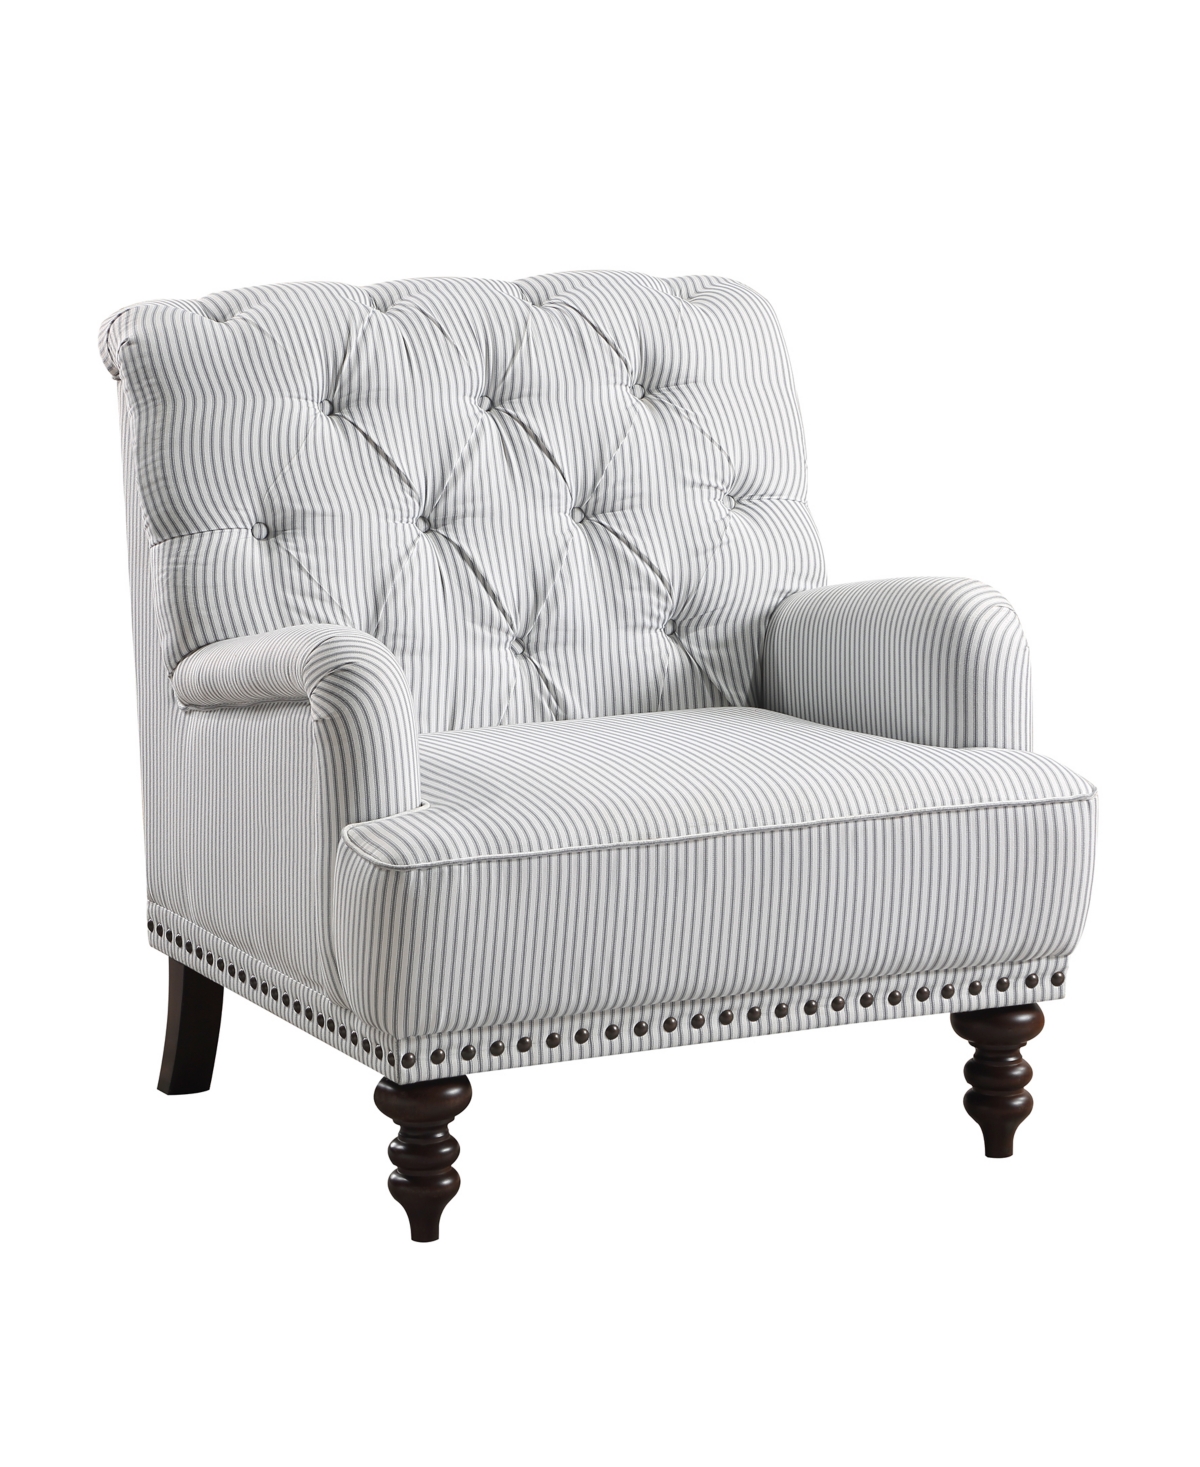 Homelegance White Label Mara 36" Accent Chair In Gray And White